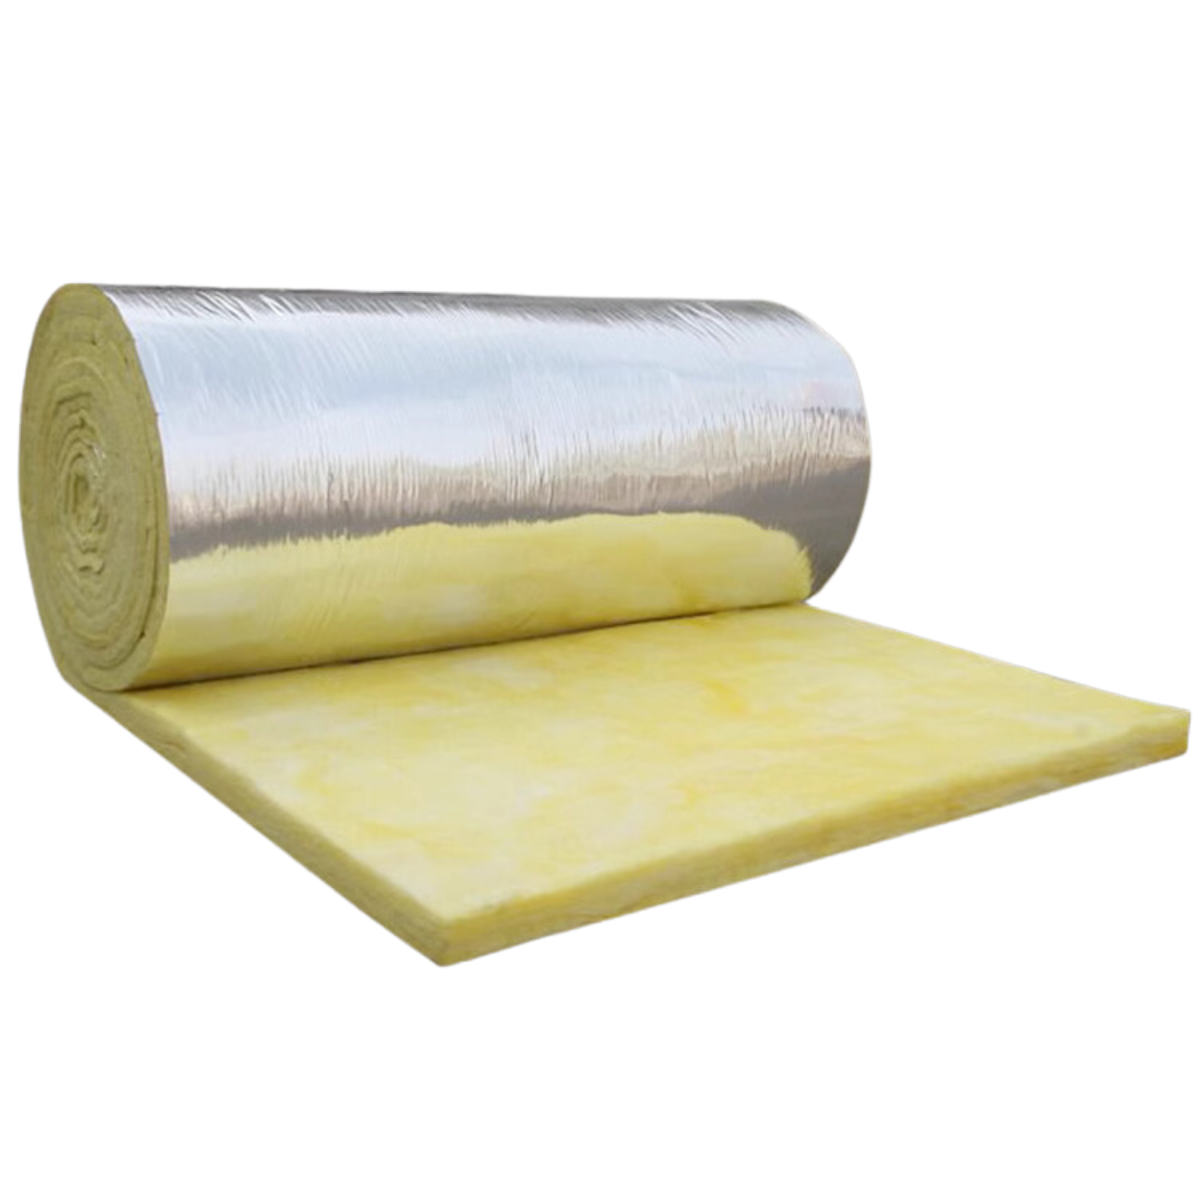 Ena glass wool (sound insulation, fire protection)